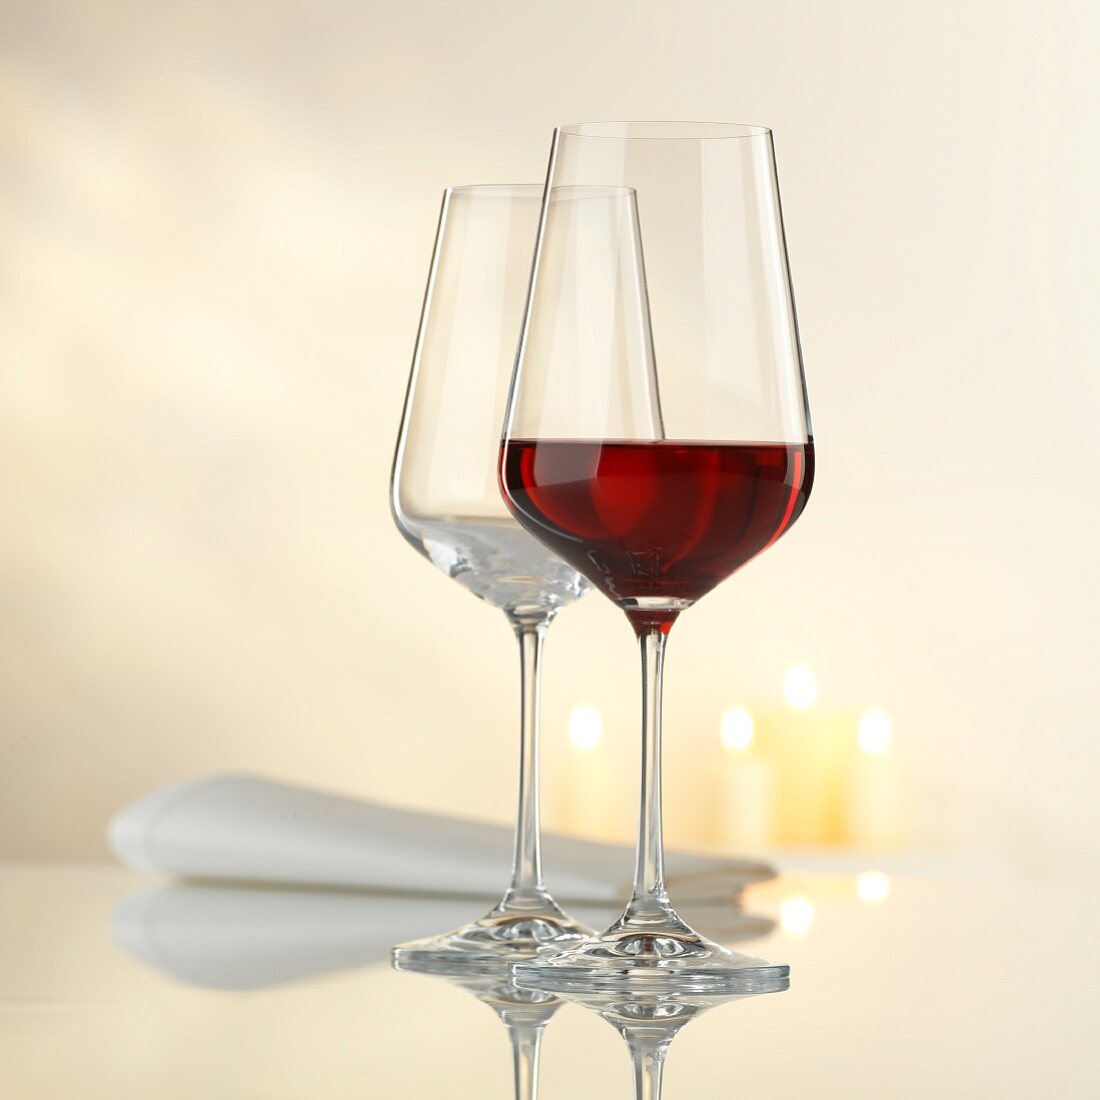 Two wine glasses with a napkin and candles